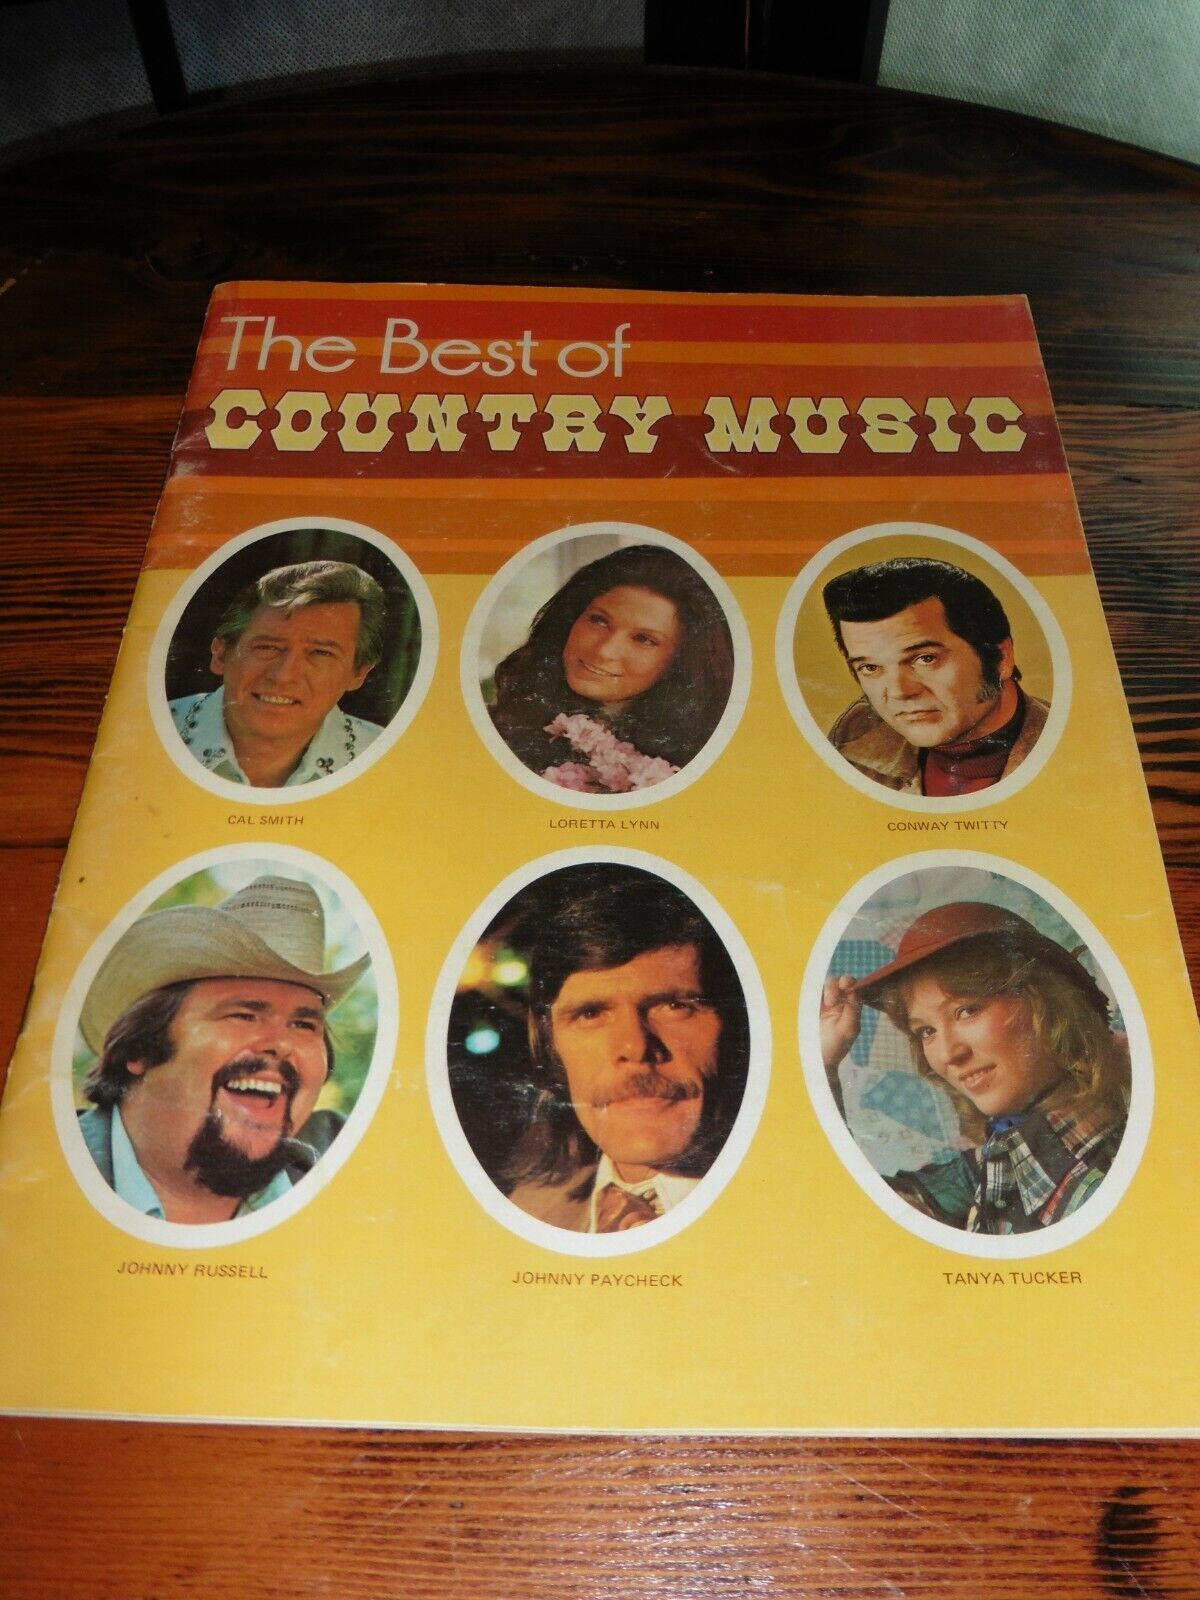 THE BEST OF COUNTRY MUSIC mid 1970's: Pictures and bios of stars of the era